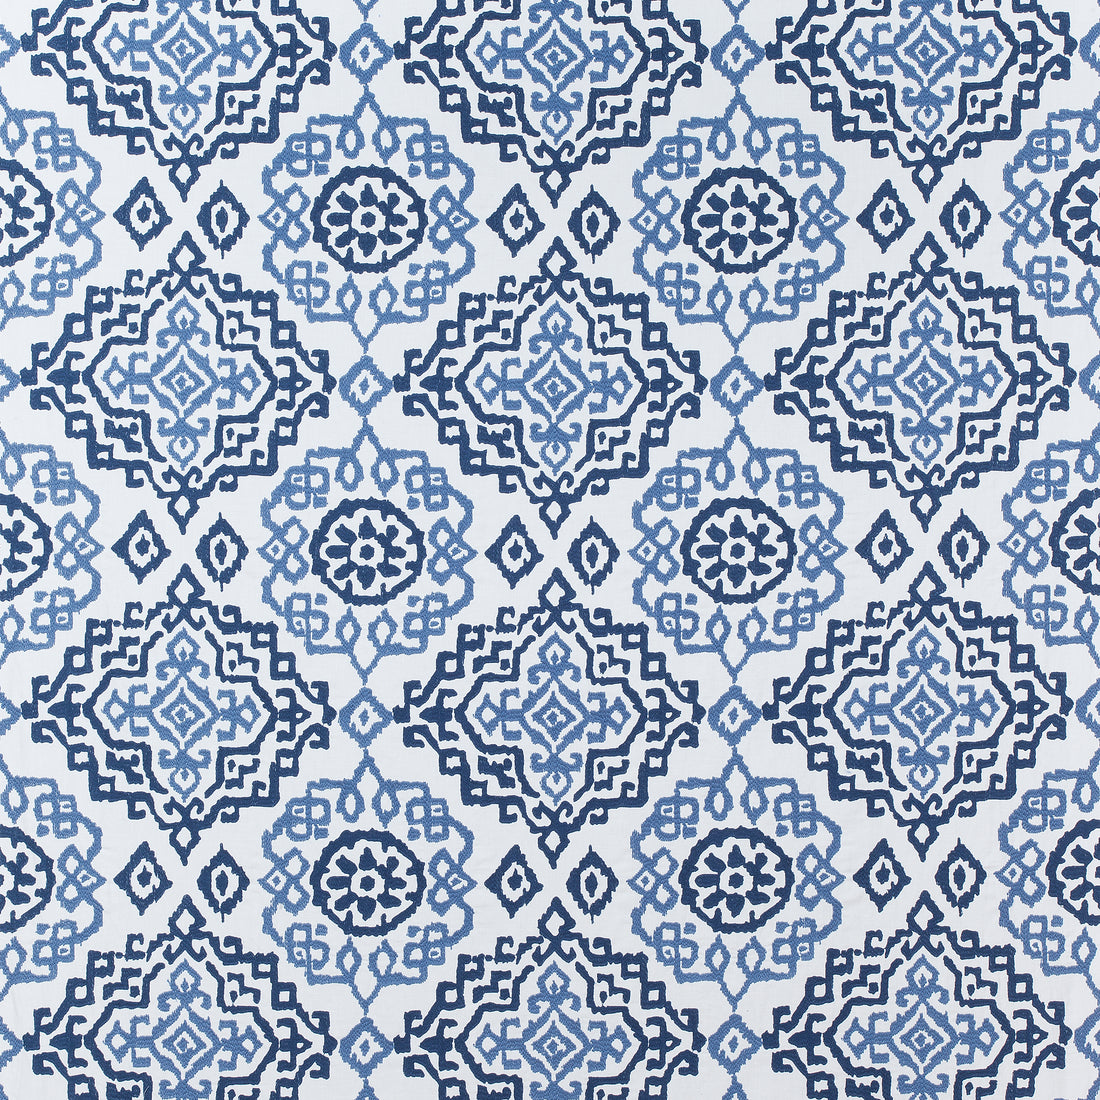 Scottsdale Embroidery fabric in blue and white color - pattern number AW73016 - by Anna French in the Meridian collection